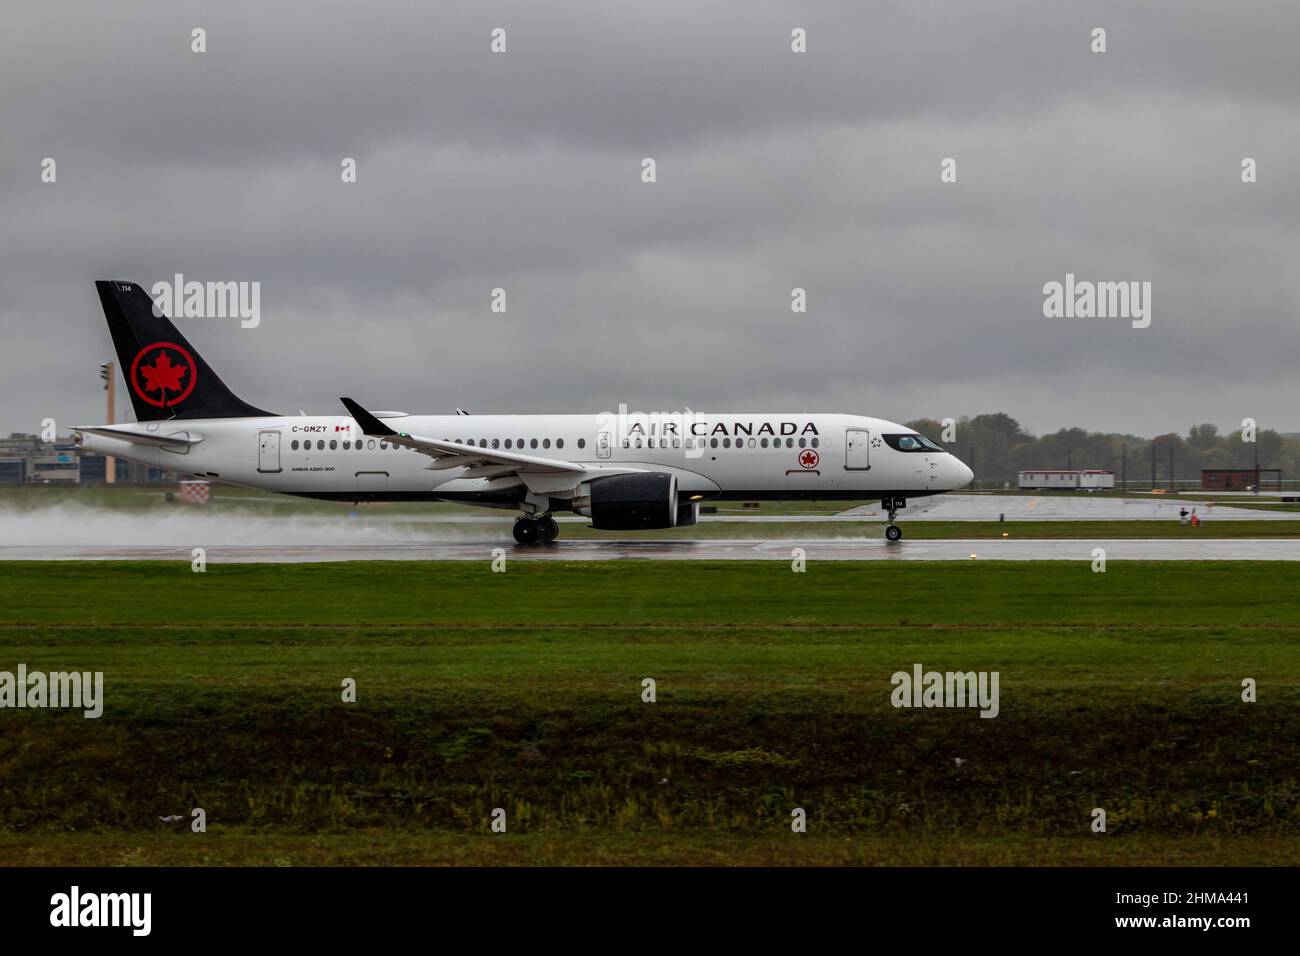 Montreal, Quebec, Canada 10-02-2021: Air Canada Airbus A220-300 fin 114, registration C-GMZY. Taking off from Montreal on a rainy day. Stock Photo